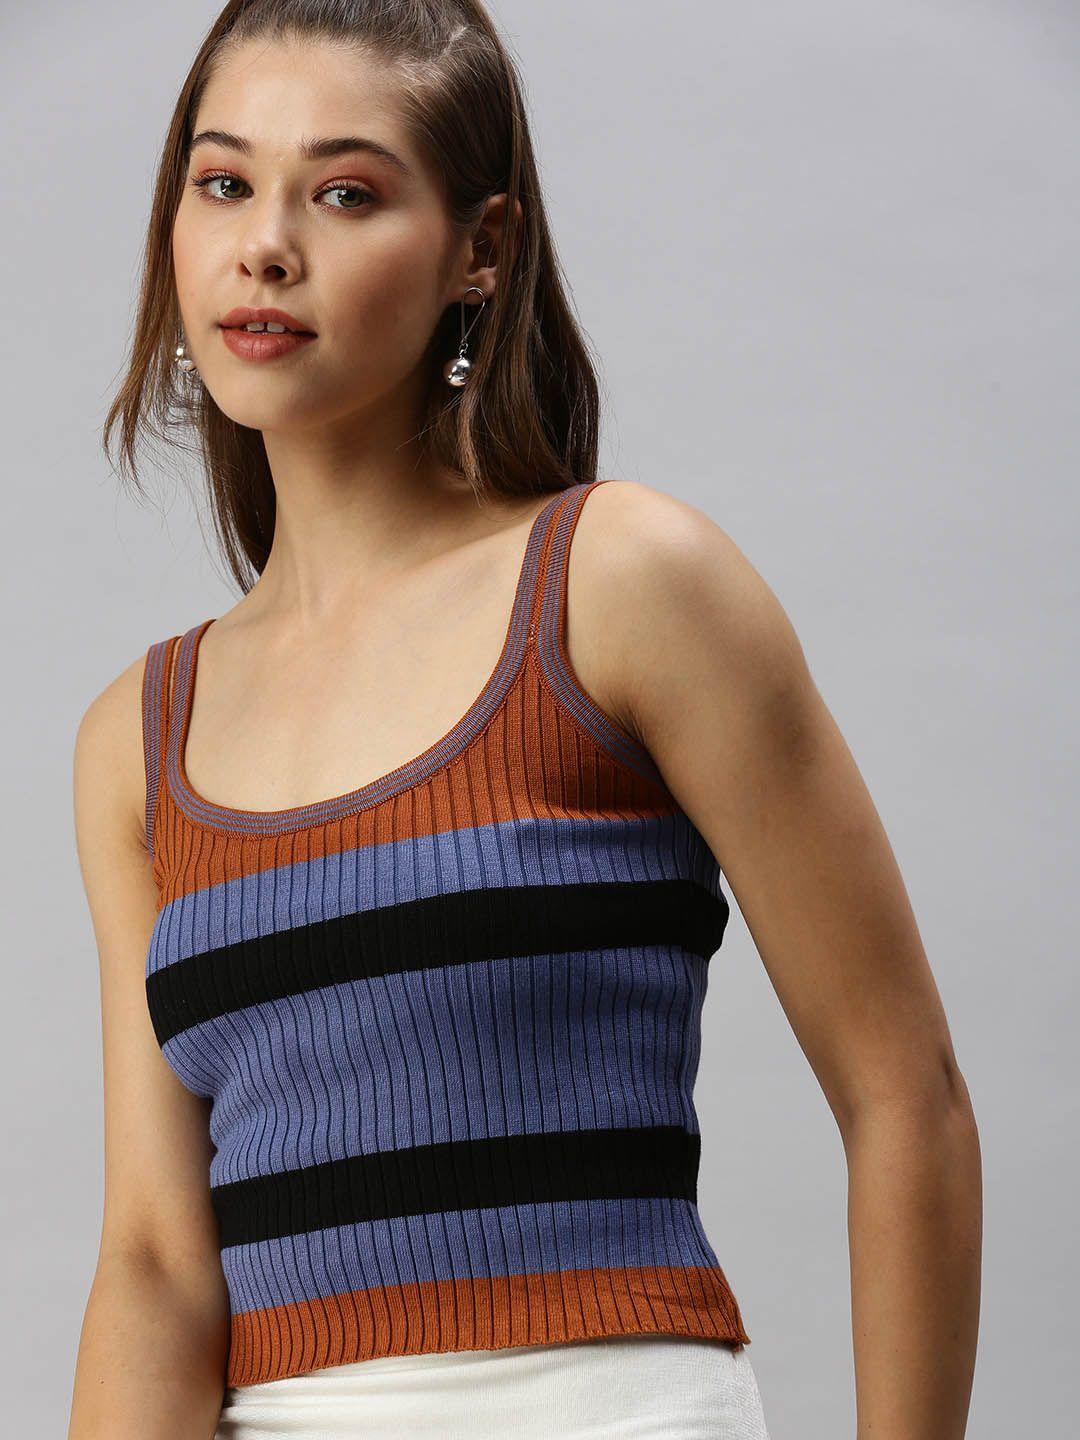 showoff-blue-candy-striped-crop-top